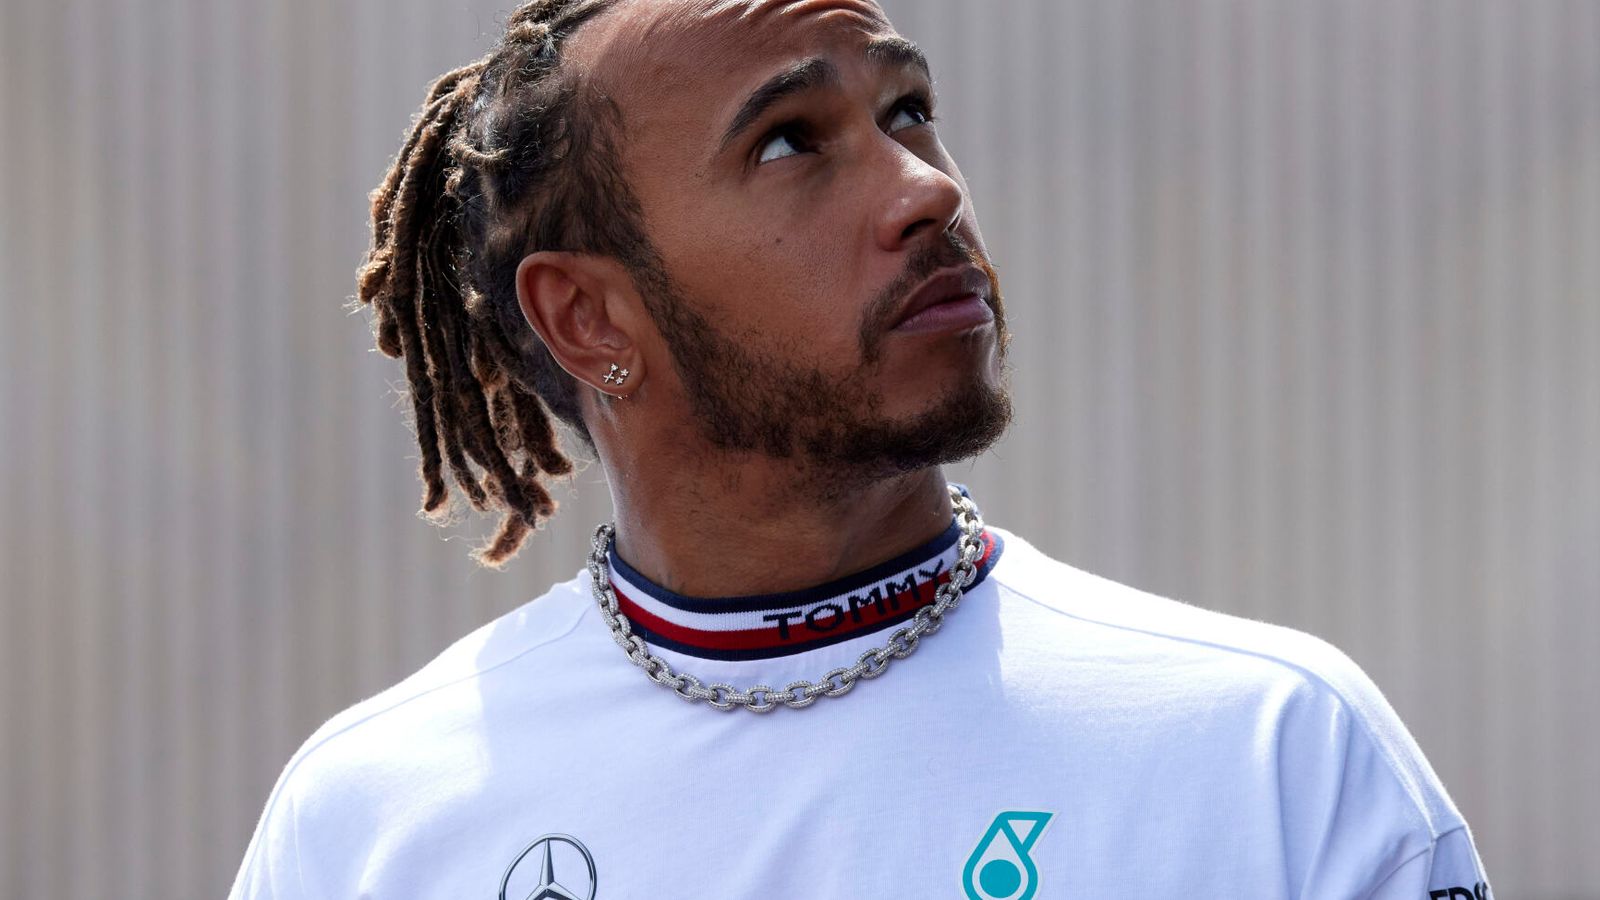 Austrian GP: Lewis Hamilton insists win ‘out of the question’ after fourth place in qualifying